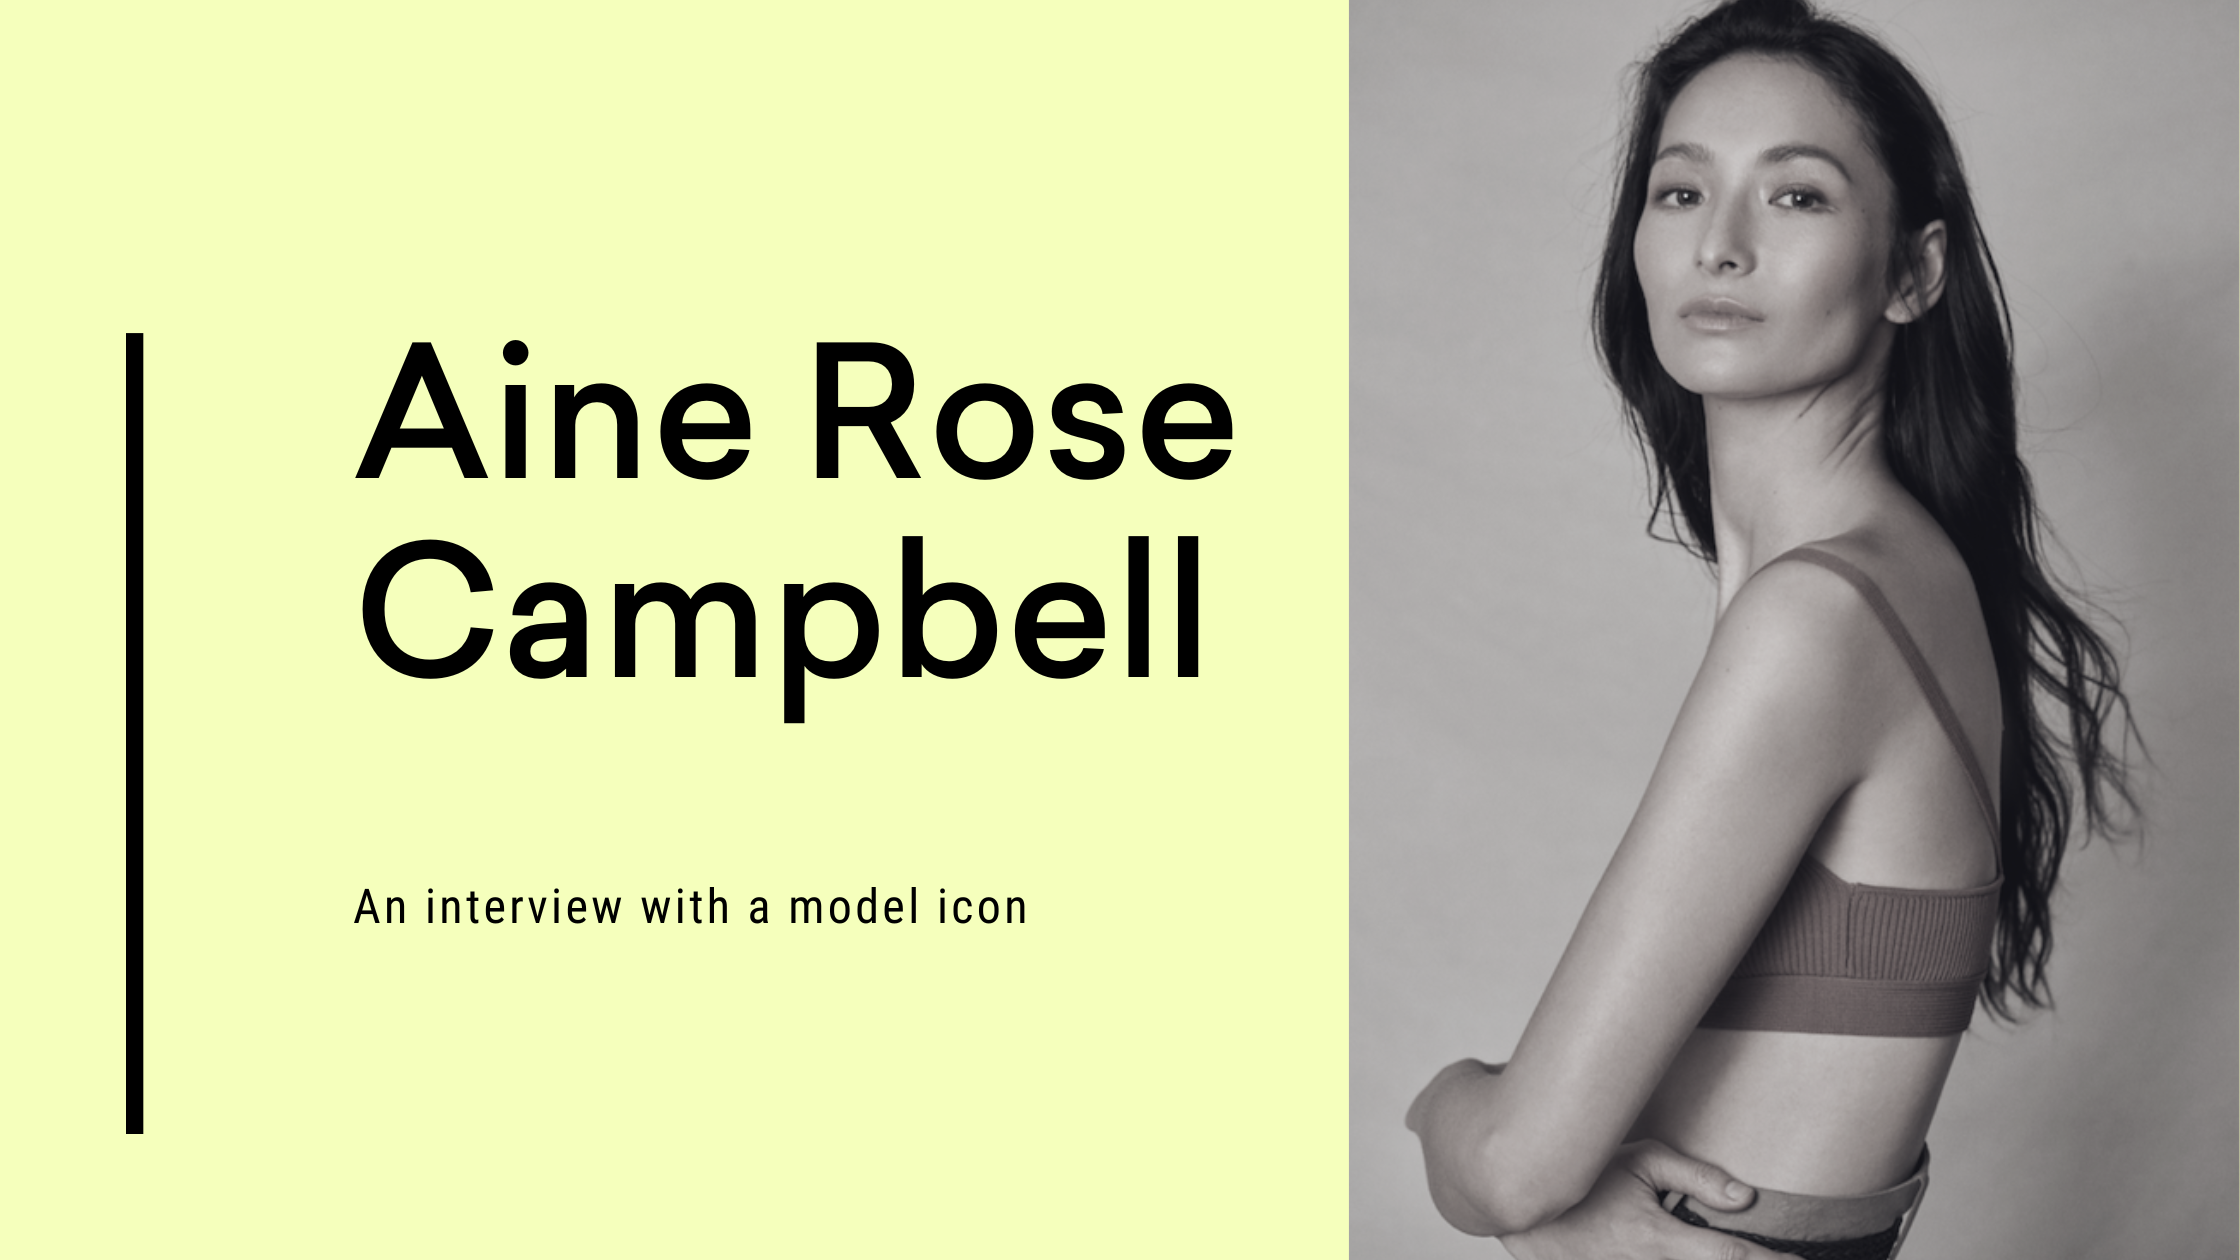 Everyday Radicals: Aine Rose Campbell